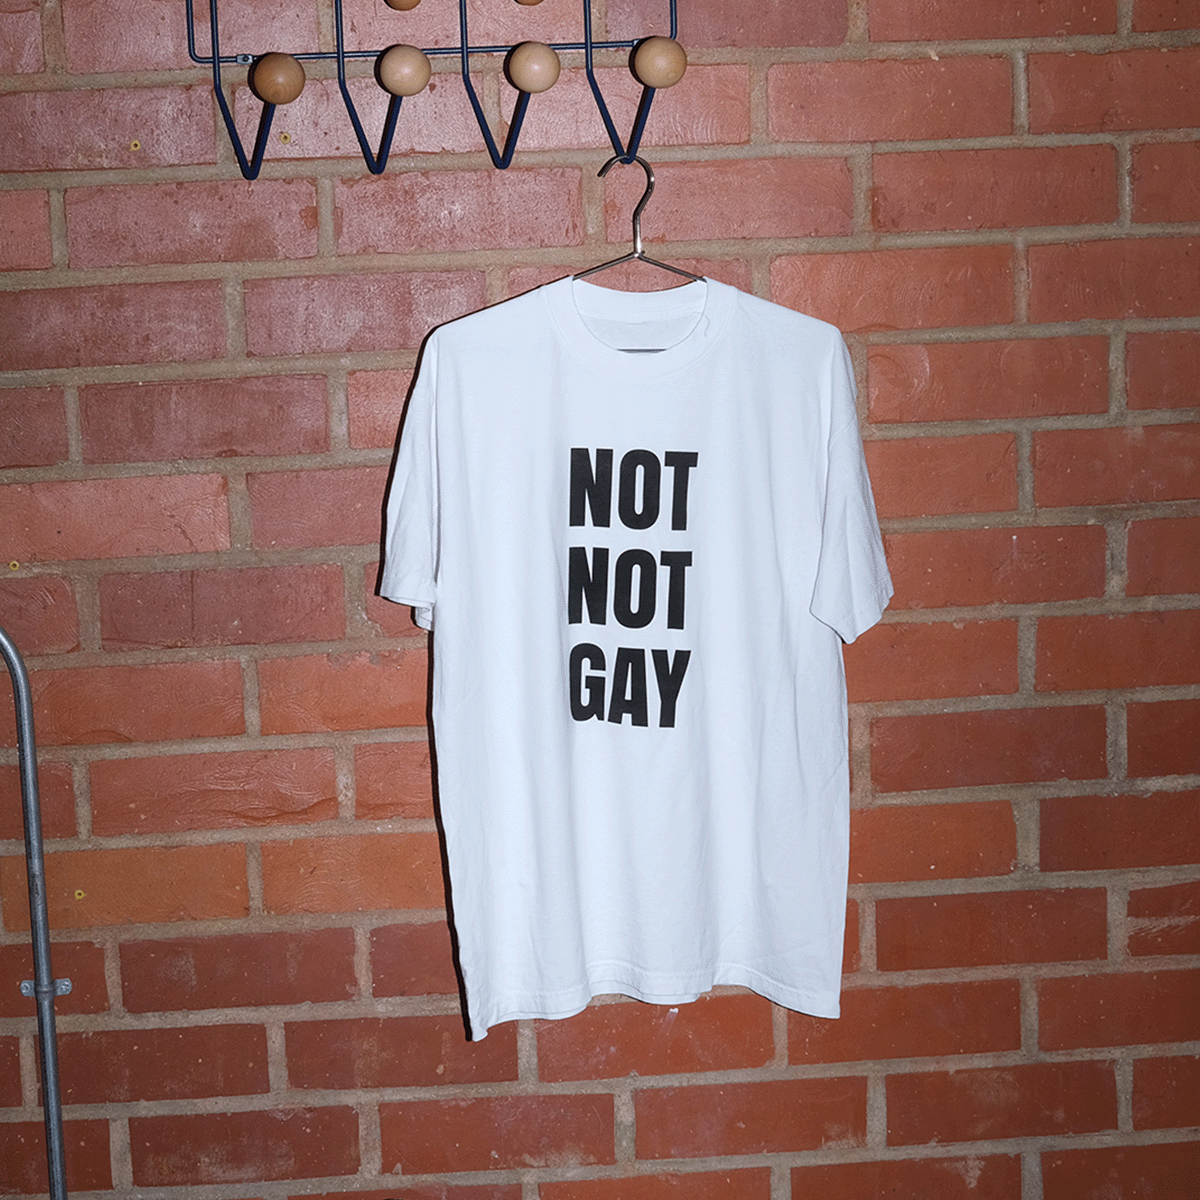 Diplo x Pizzaslime "Not Not Gay" (white)